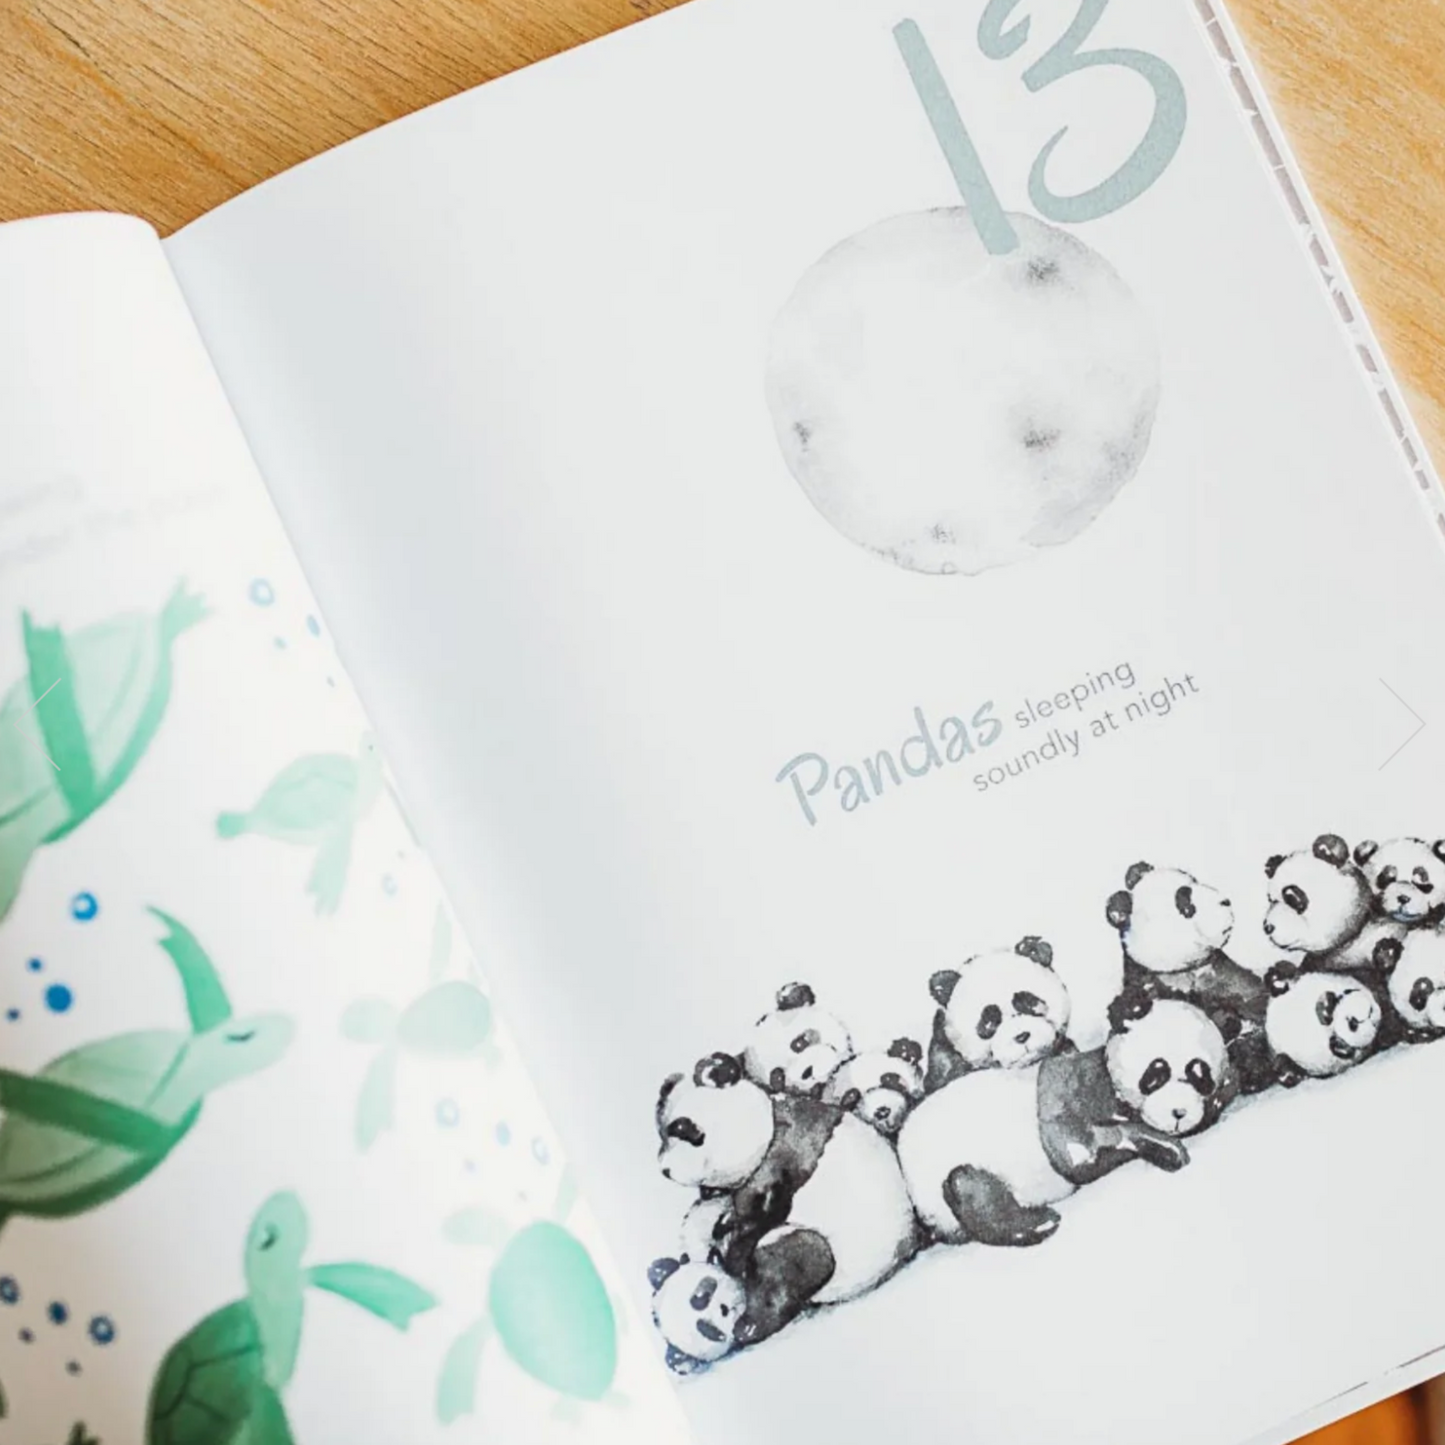 ADORED ILLUSTRATIONS - The Incredible 123 Book